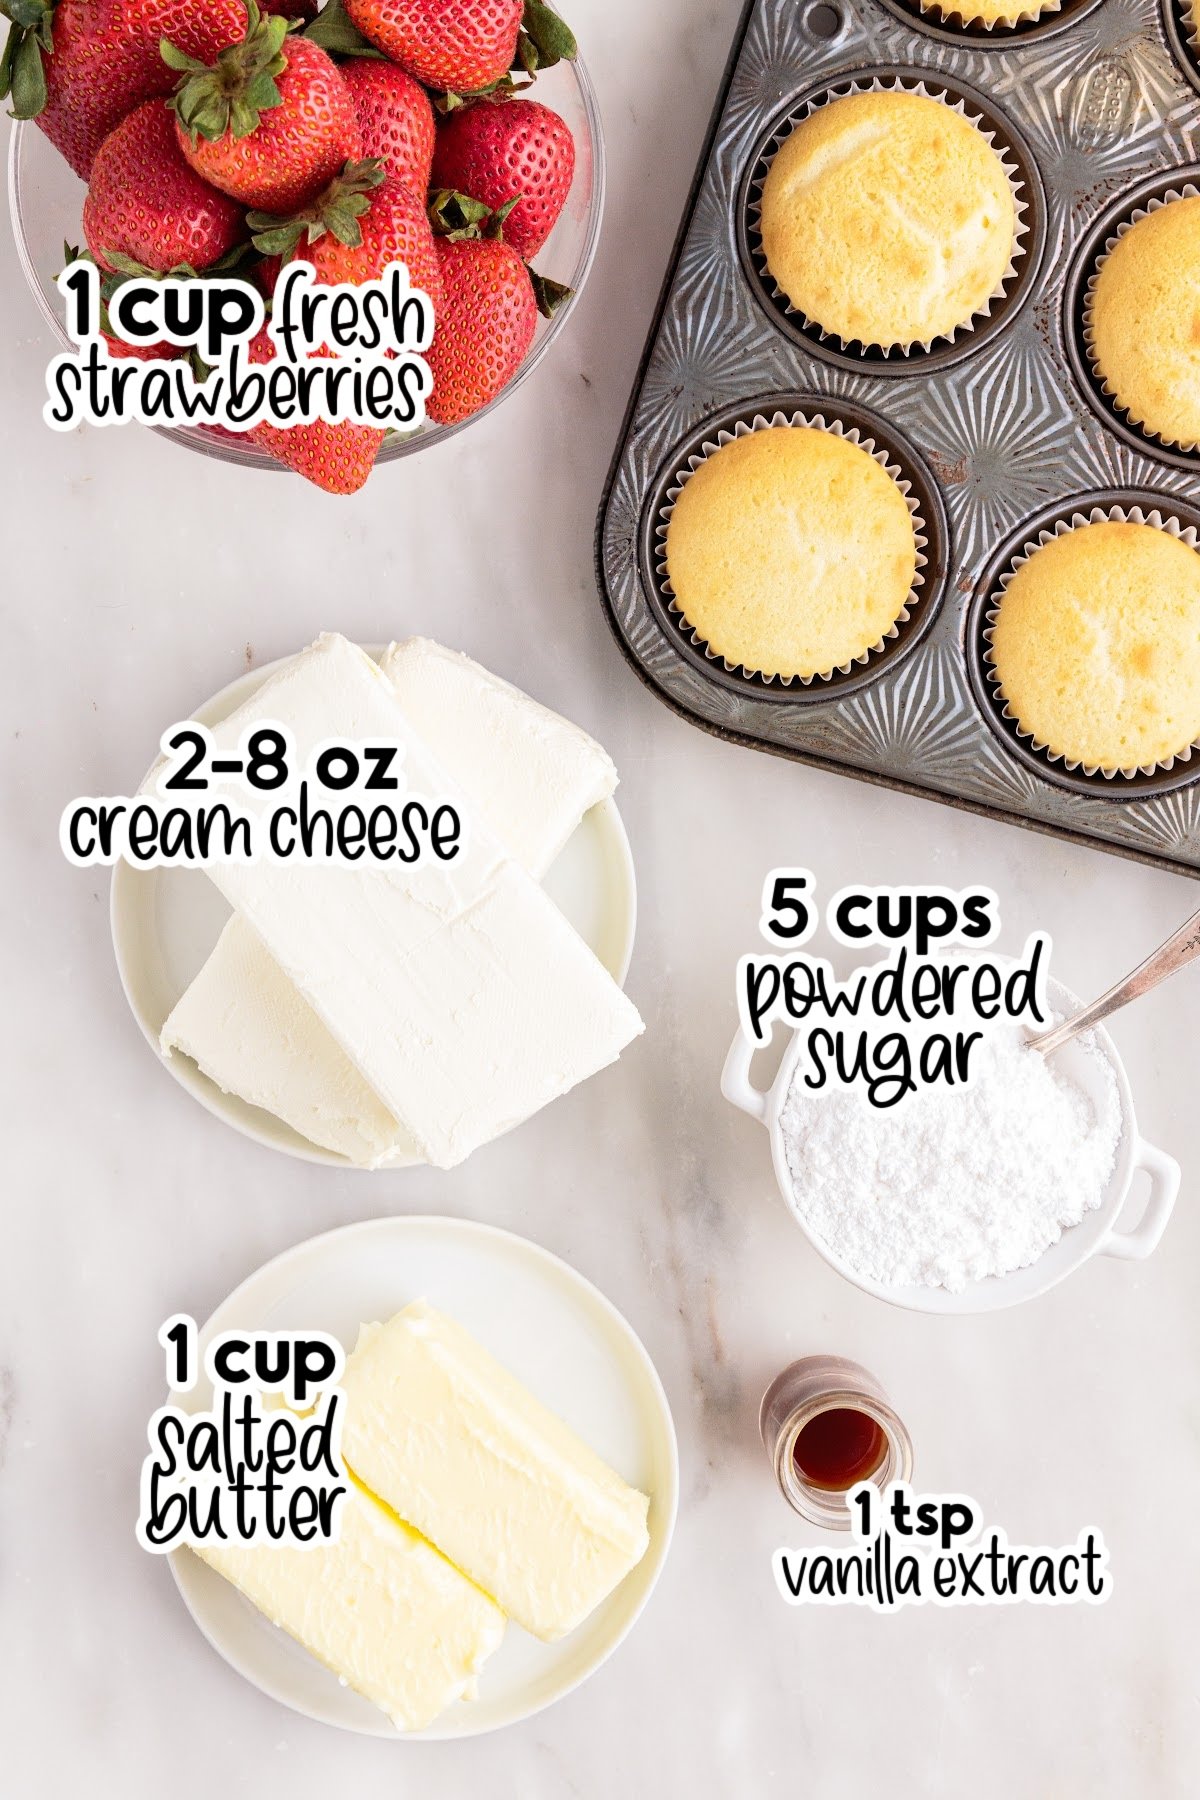 Bowl of strawberries, blocks of cream cheese, cubes of butter, dish of powdered sugar and vanilla extract, with muffin tray of cupcakes, with text and amount labels for the ingredients to make strawberry cream cheese frosting.